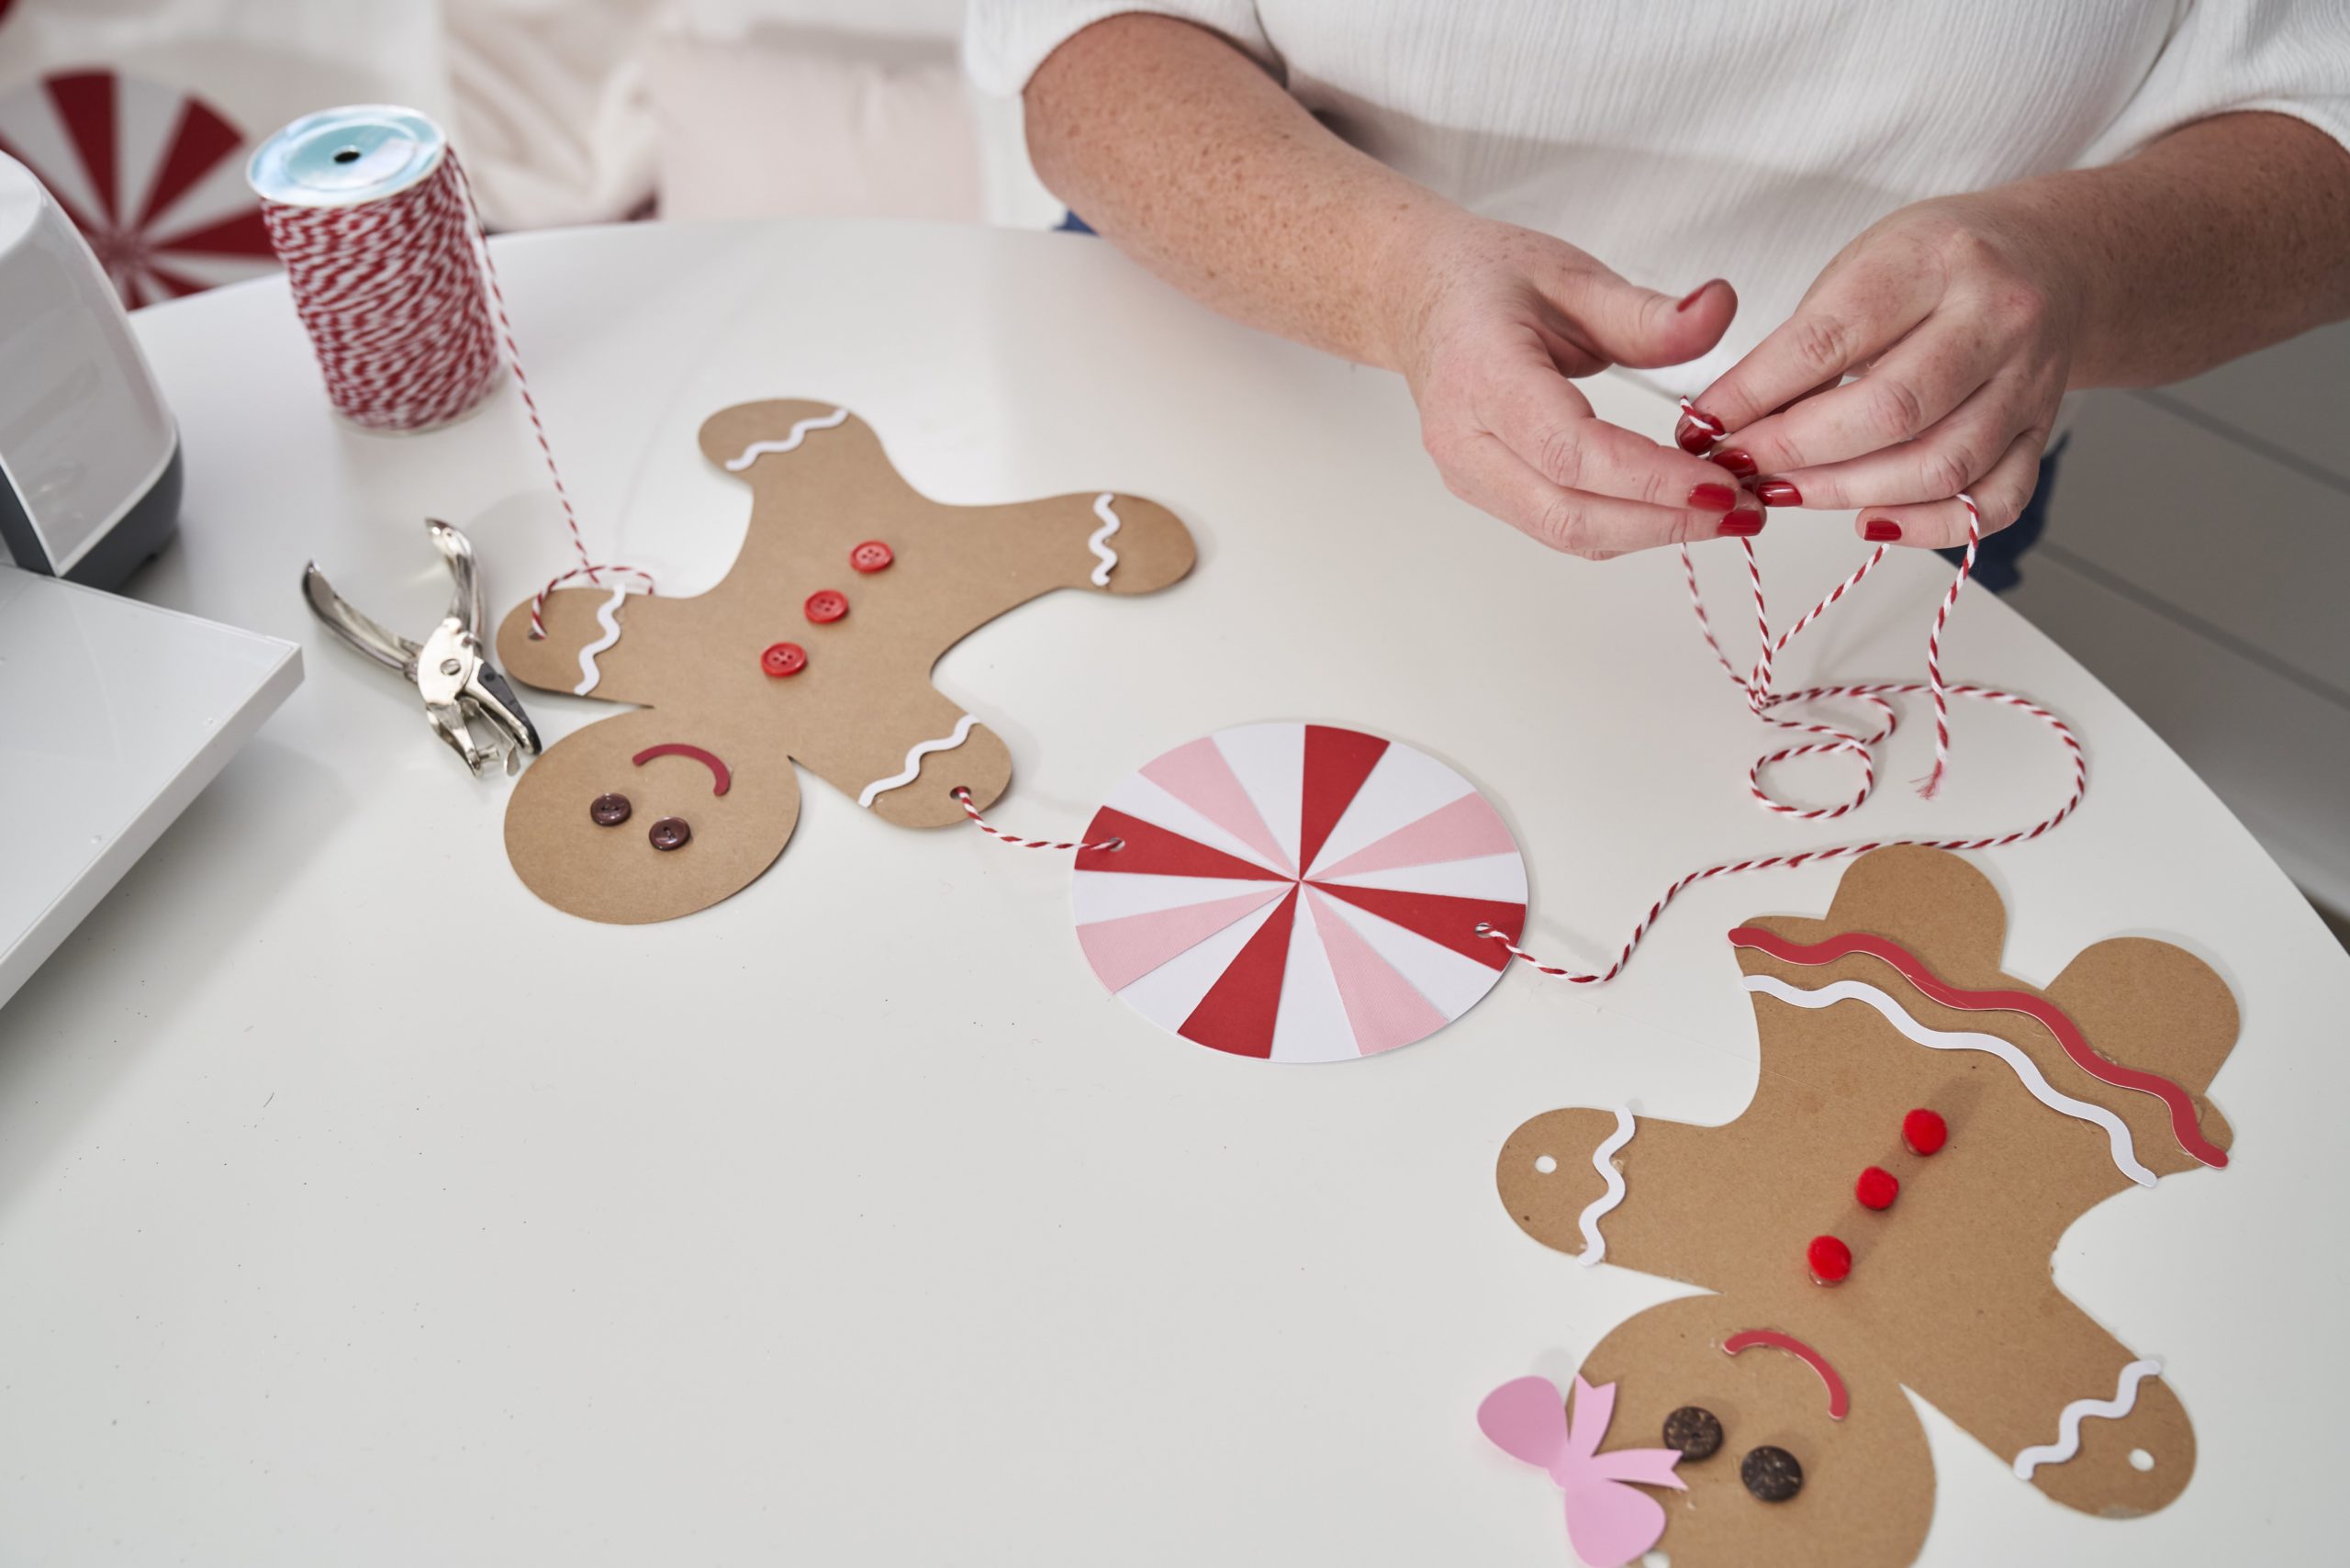 How To Make A Christmas Garland by Lindi Haws of Love The Day